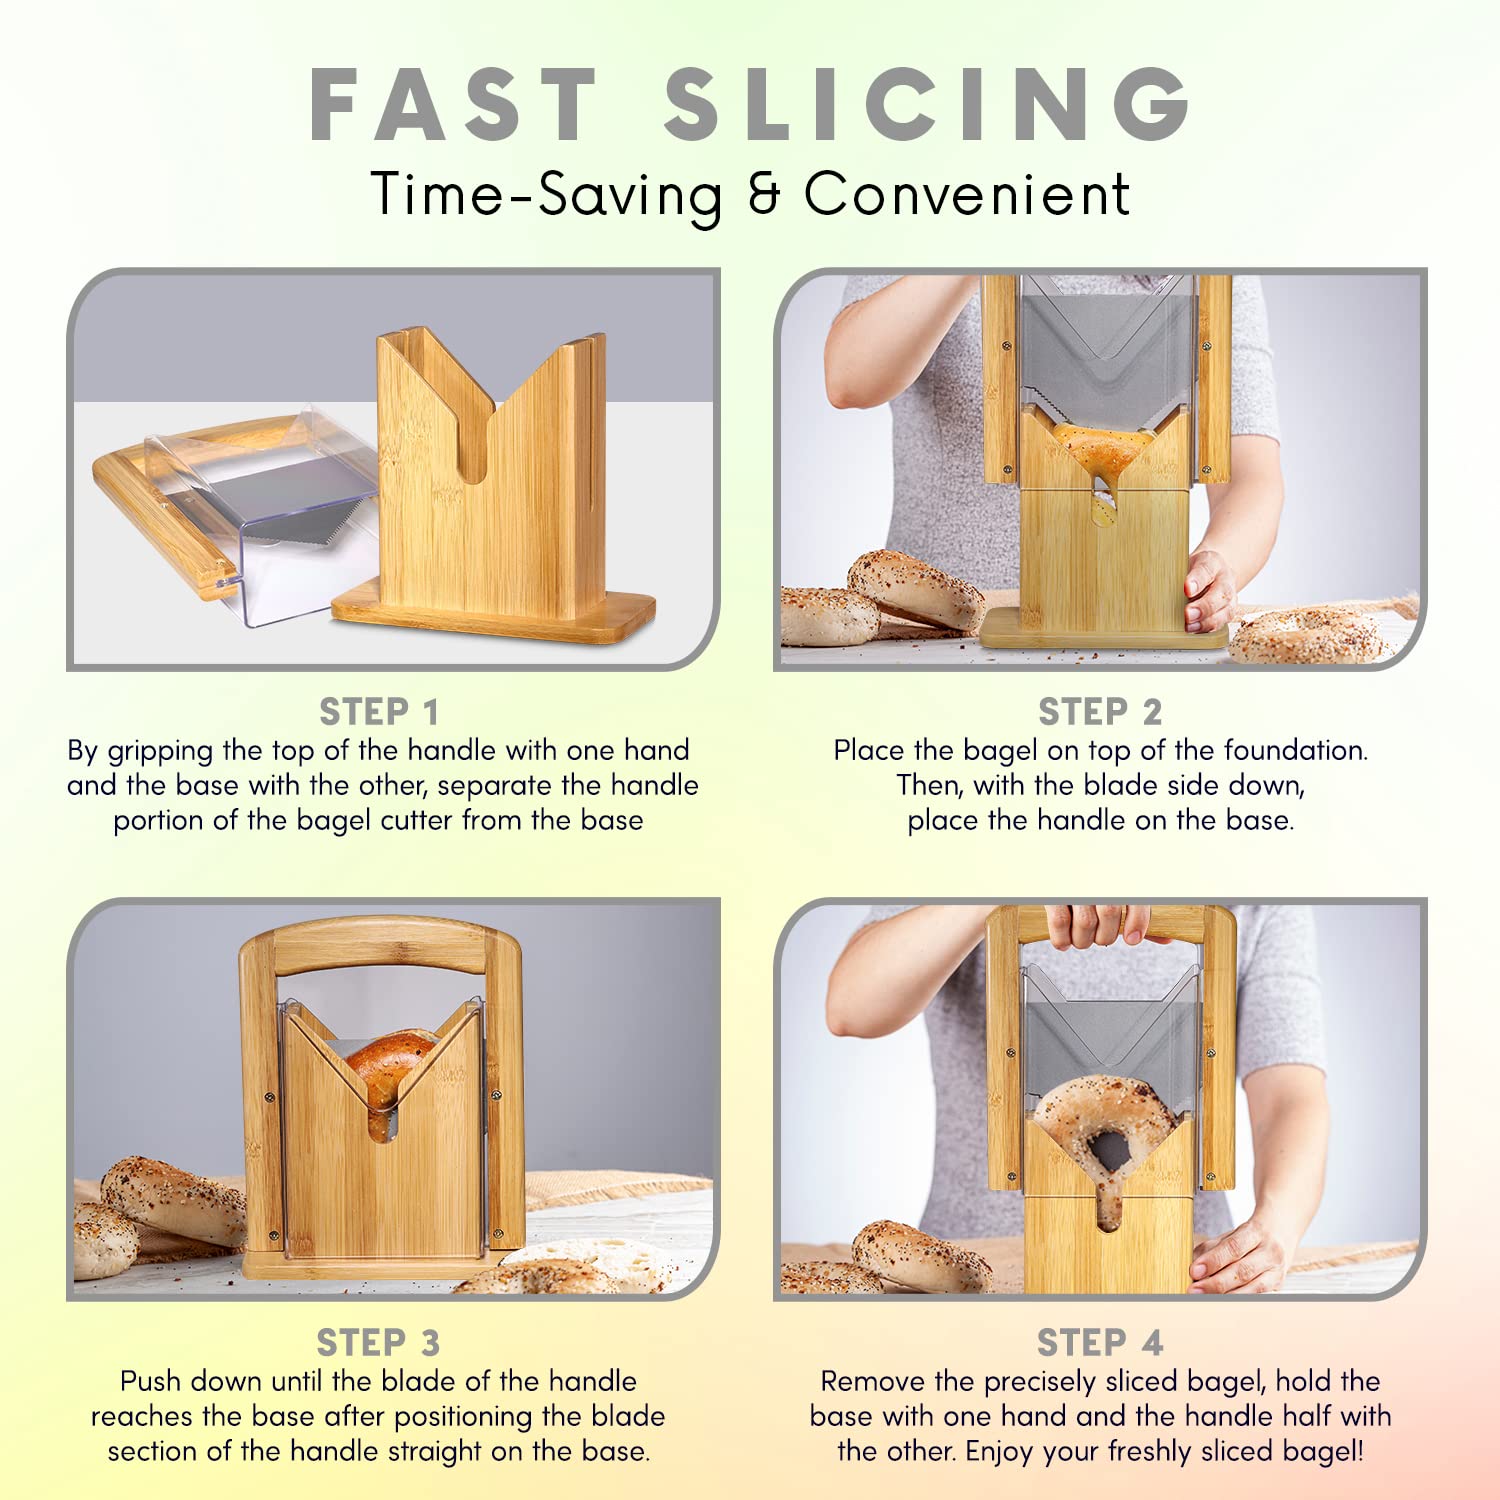 Bamboo Bagel Slicer - Guillotine Bagel Cutter with Clear Safety Shield, Non Stick Blade and Easy Grip Handle - Bread Slicer for Homemade and Commercial Buns, Muffins and Rolls (By Homeries)  - Acceptable